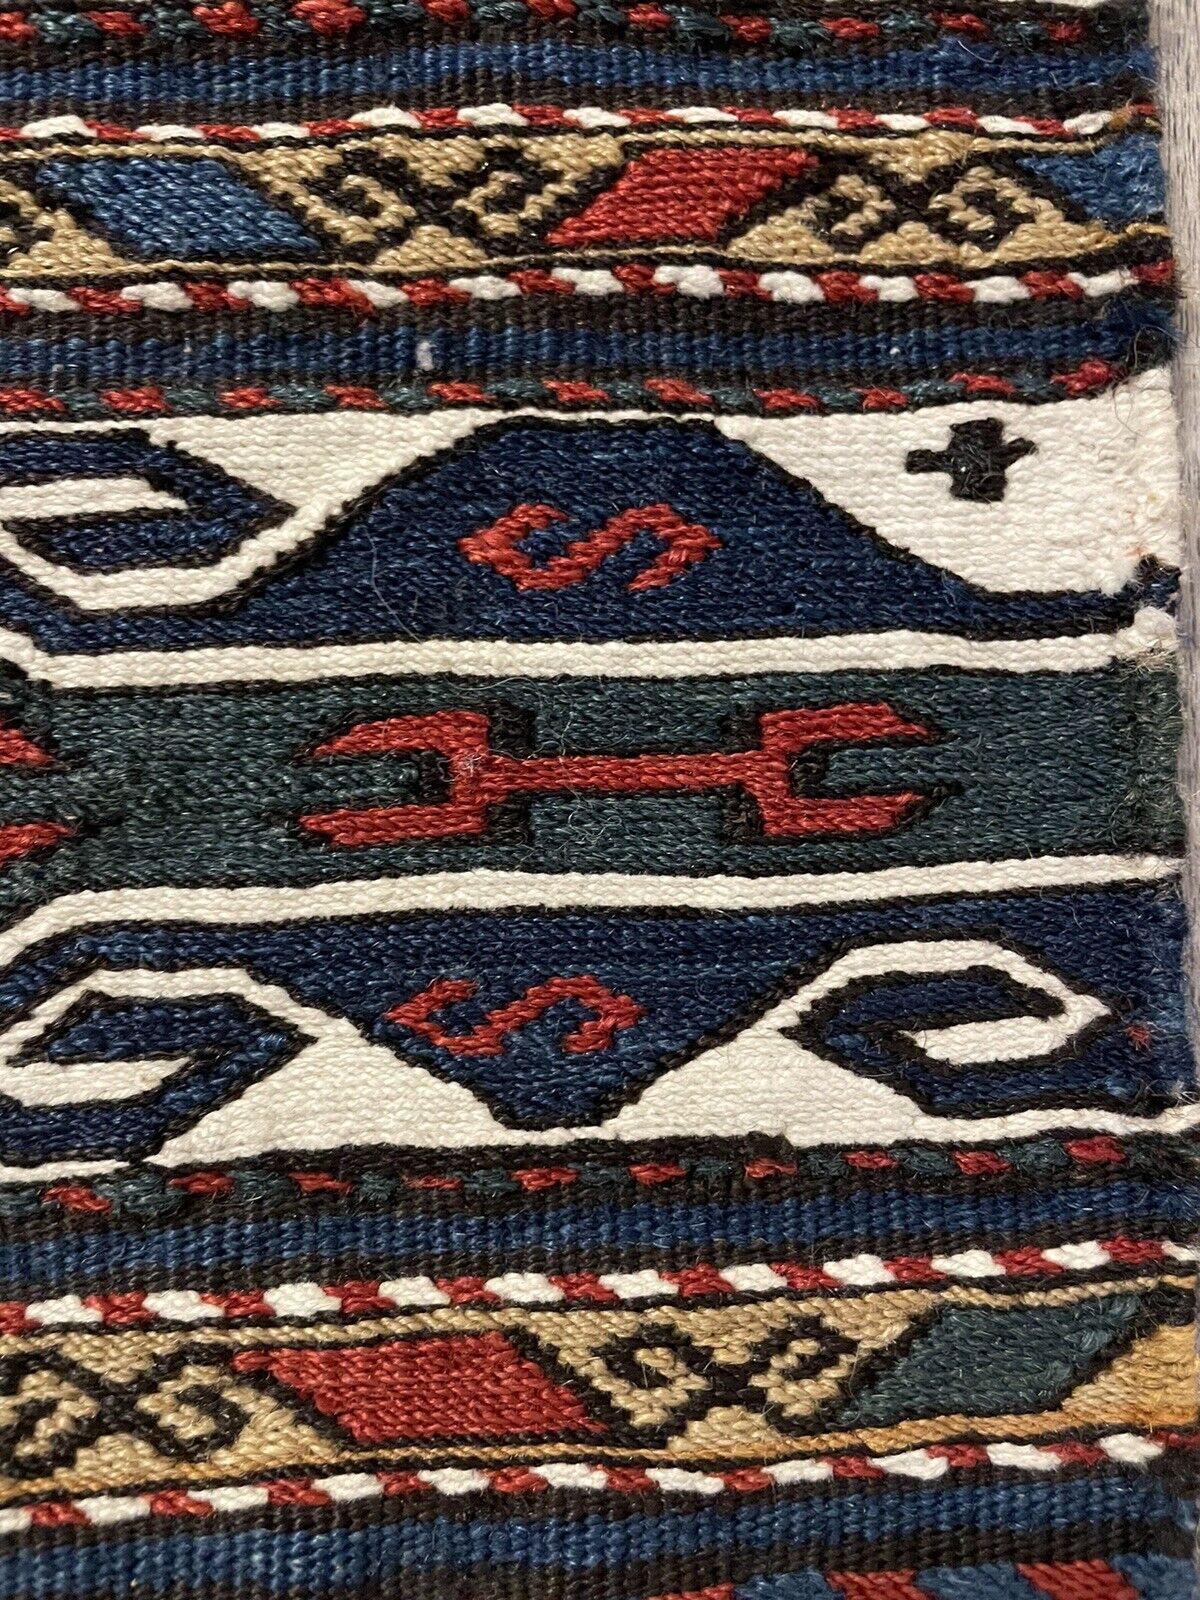 Close-up of craftsmanship on Handmade Antique Persian Sumak Collectible Kilim - Detailed view showcasing the meticulous craftsmanship involved in creating the kilim.